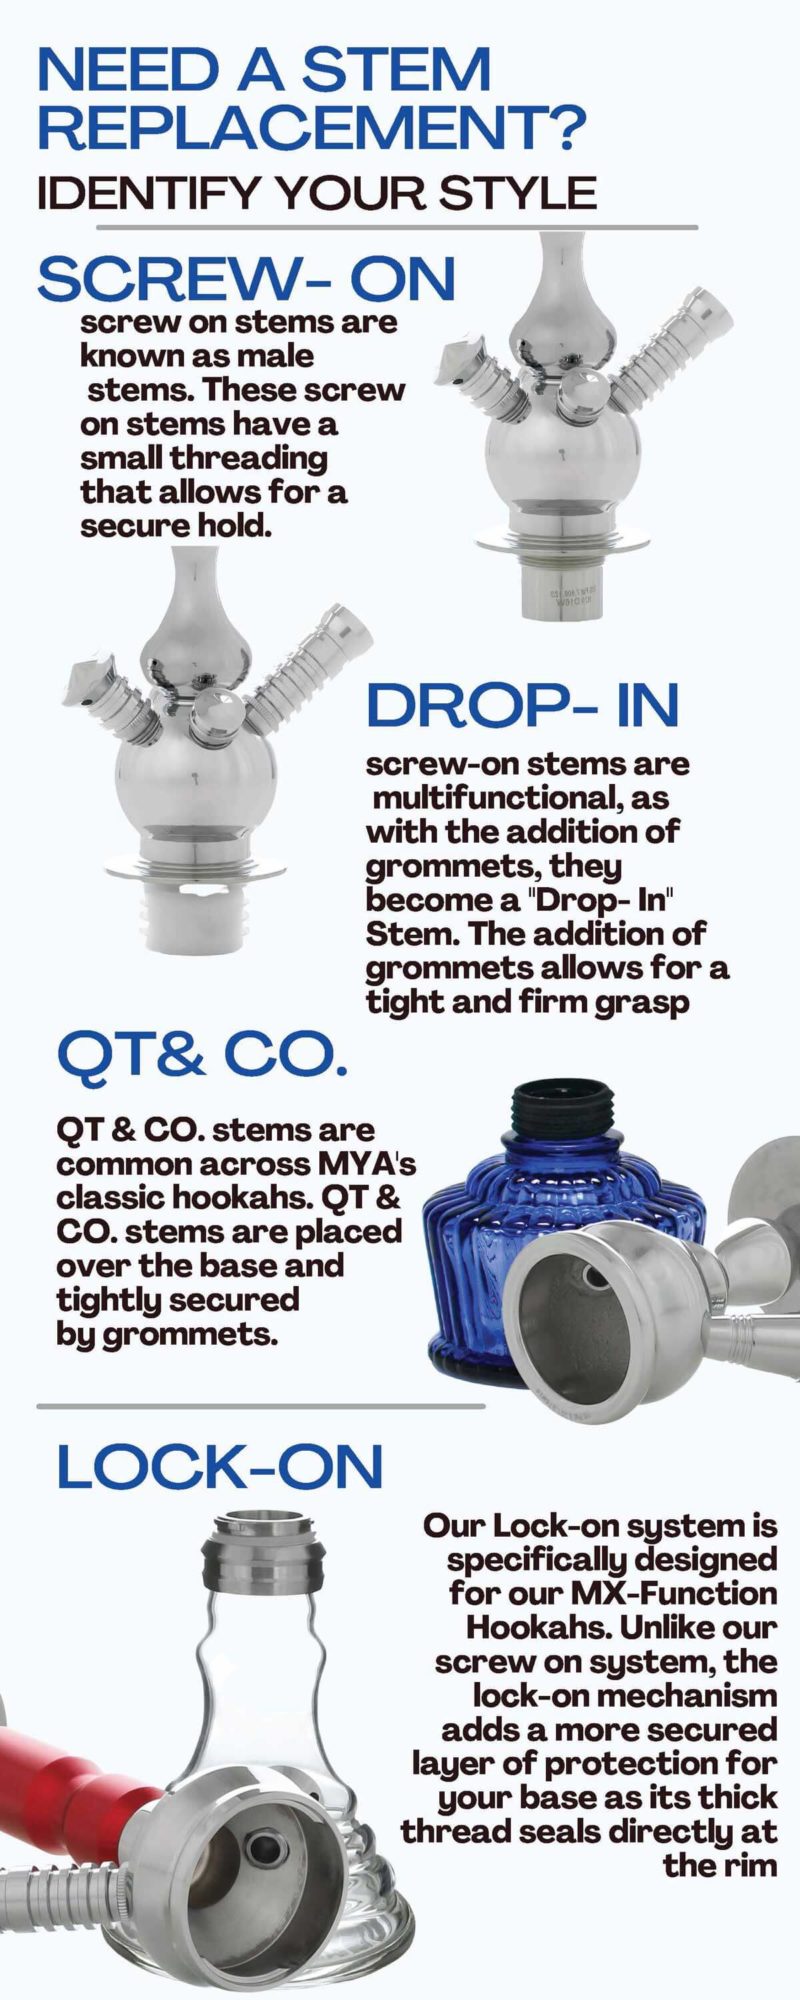 Choose your style of hookah stem either drop in, Screw-on, lock-on, or QT & Co. Ask for help from our customer service team.